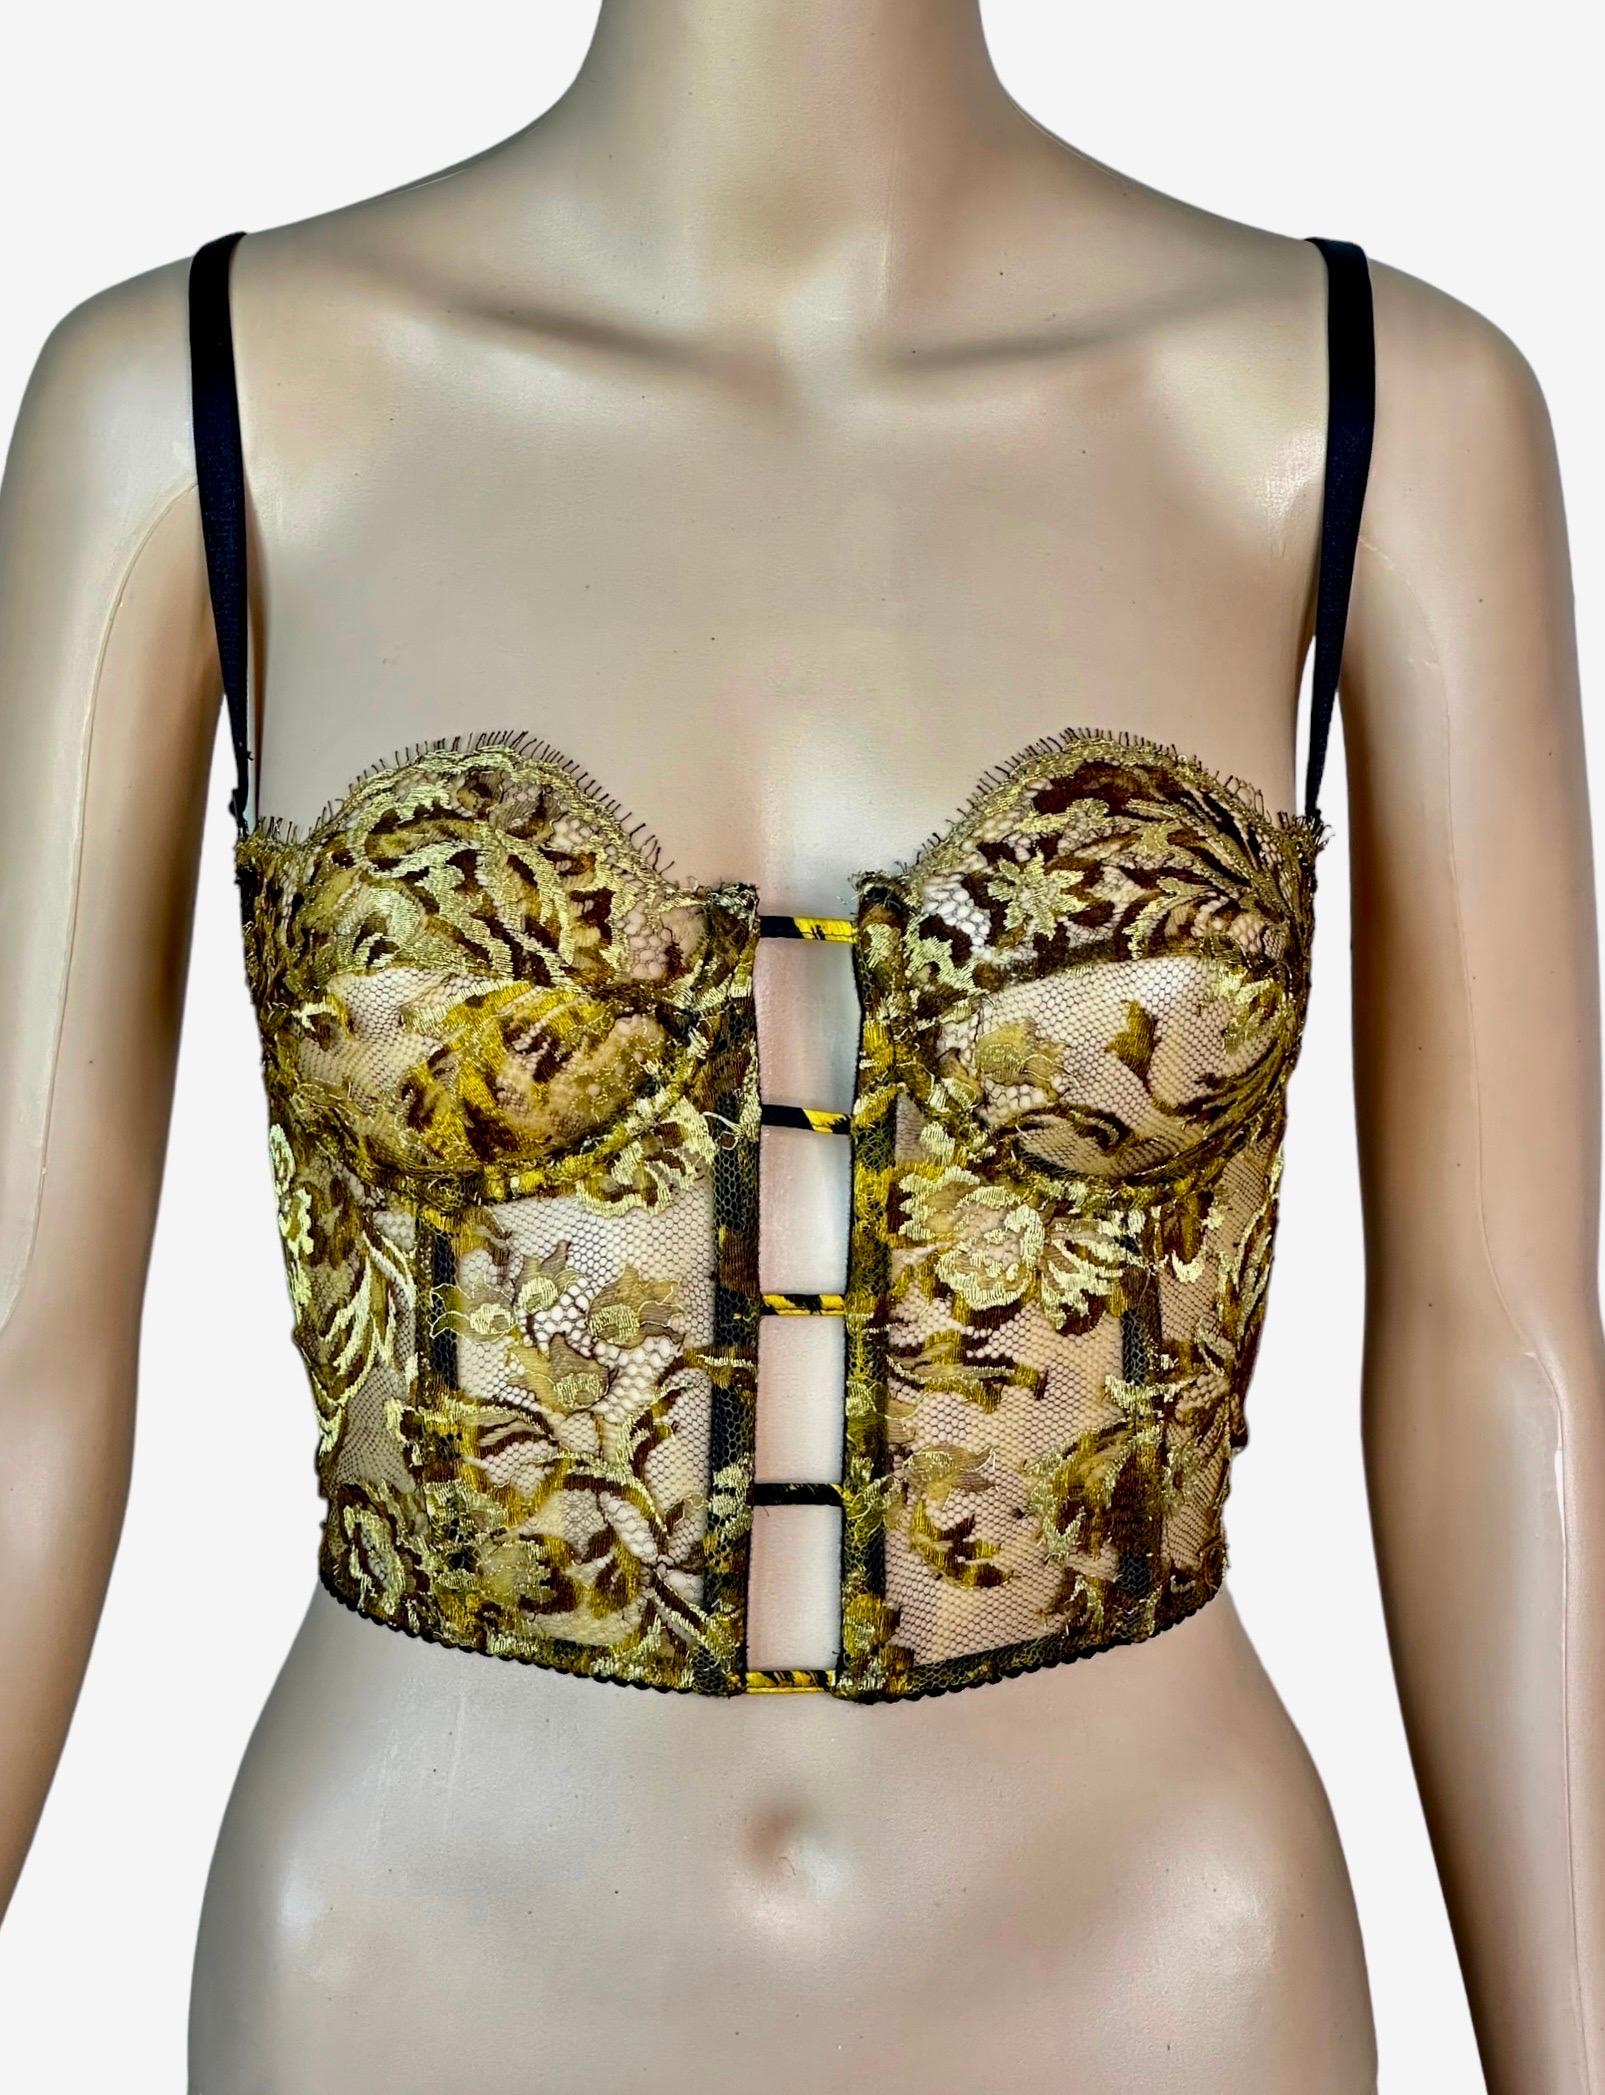 Gianni Versace S/S 1992 Unworn Sheer Gold Embroidered Lace Bustier Bra Crop Top  For Sale 2